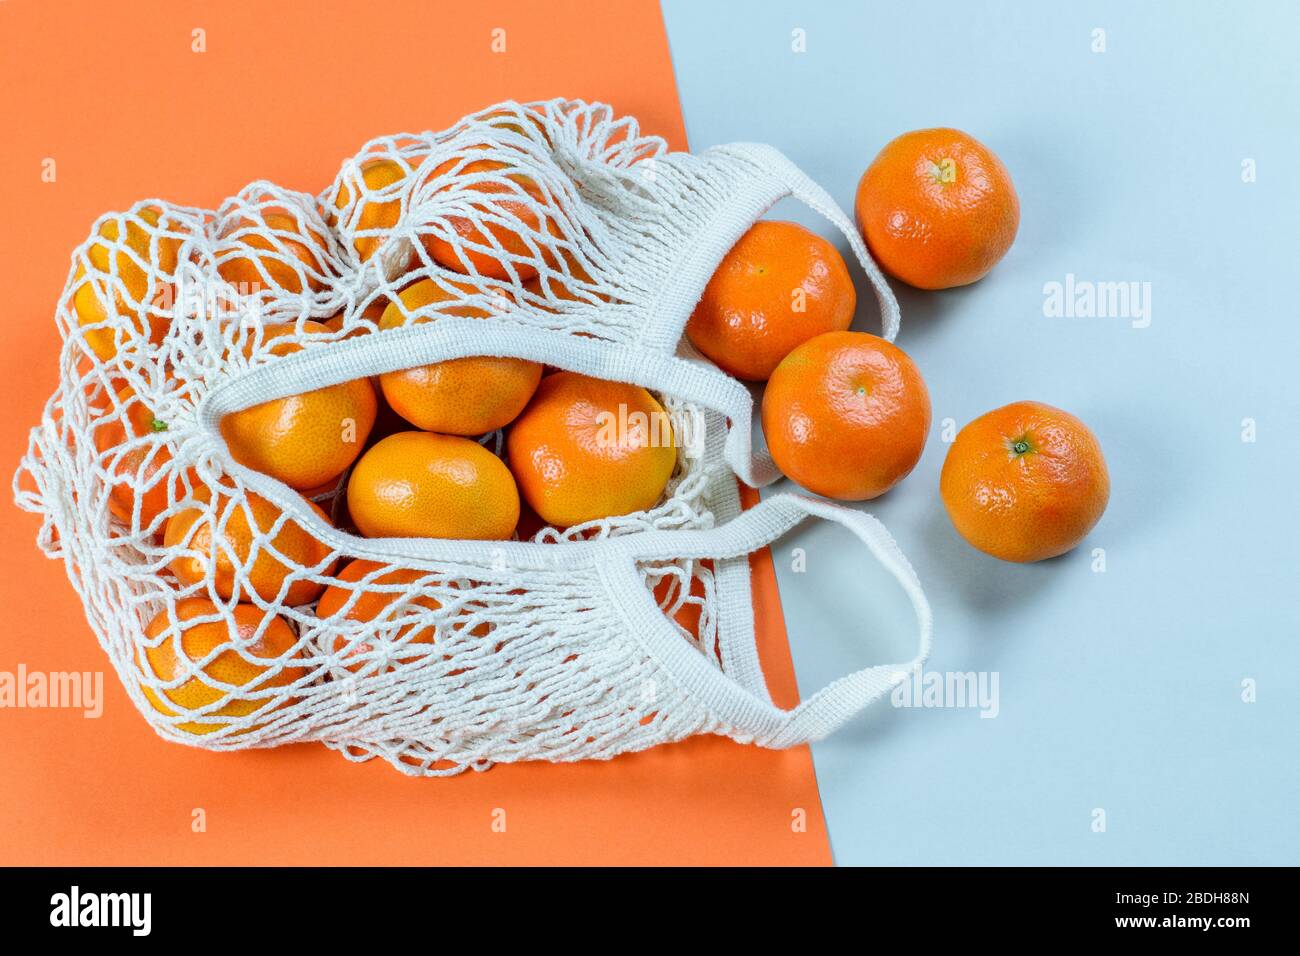 Fresh tangerines in a netted bag, Stock image